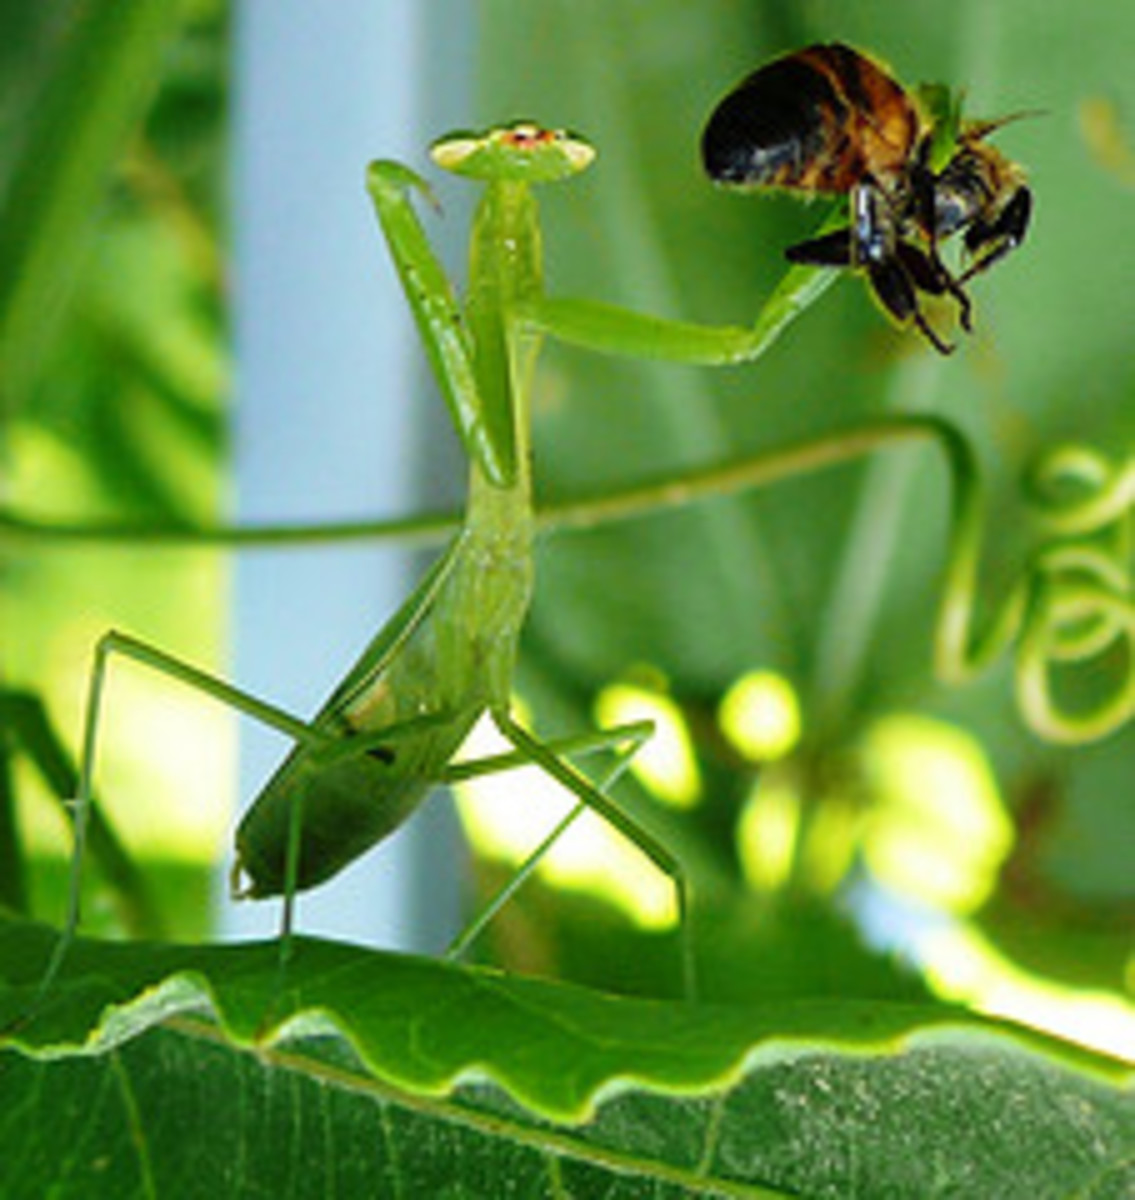 The Enemy, a Praying Mantis eating a Bee.